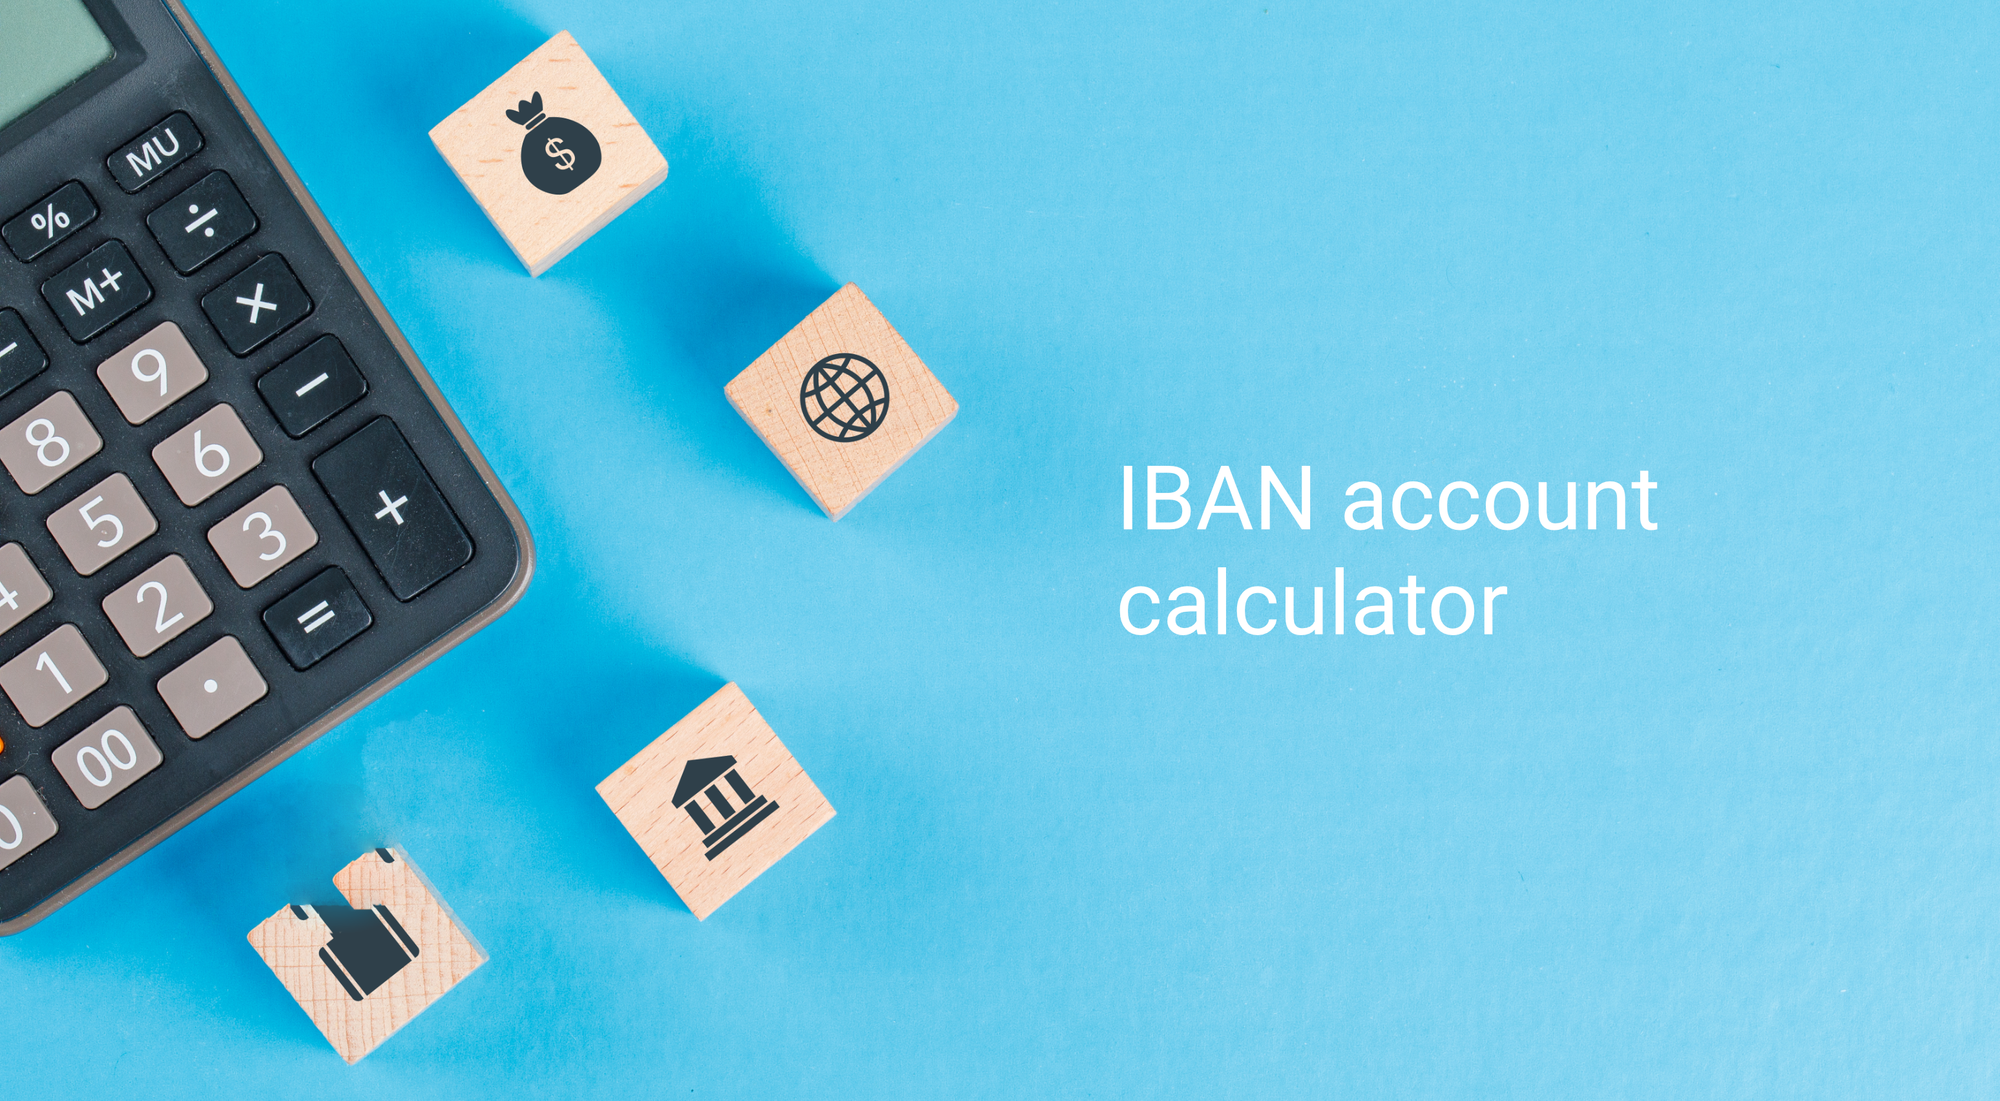 IBAN Account Calculator, What is it?